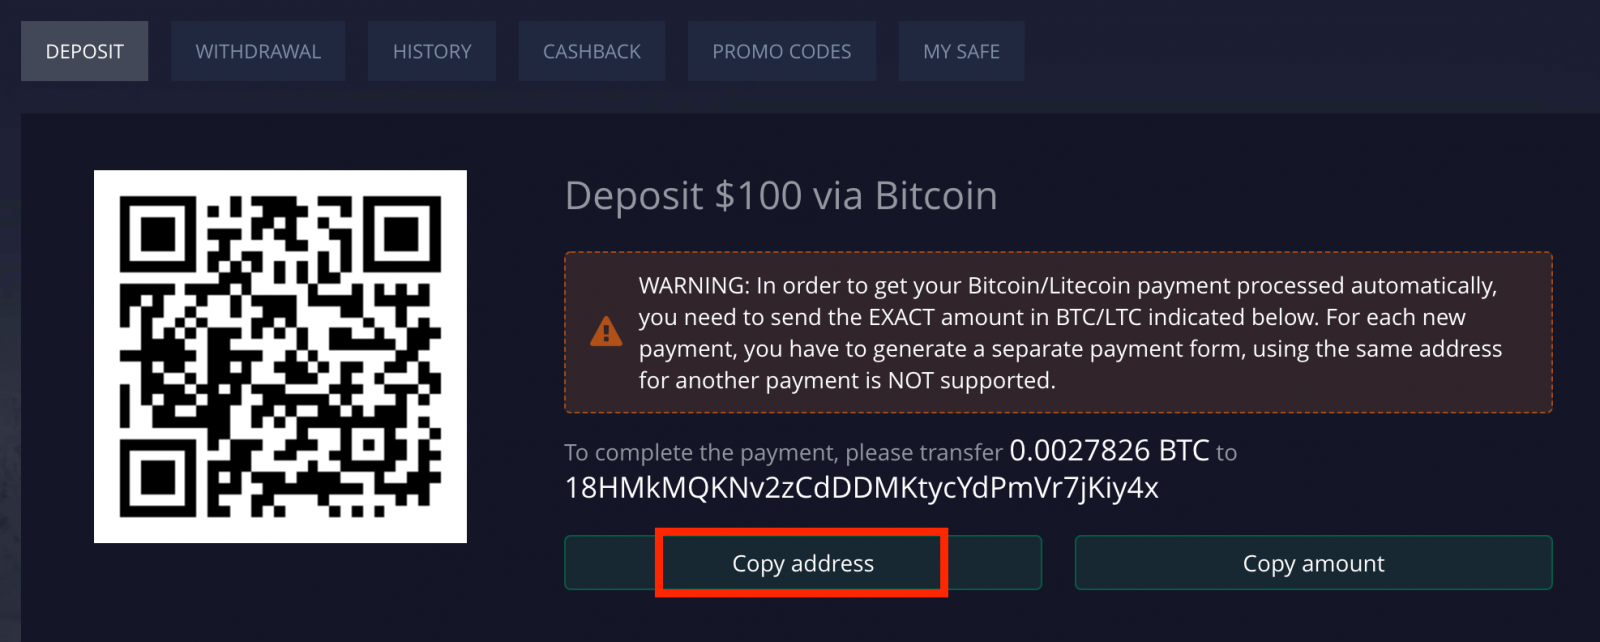 How to Deposit and Trade Digital Options at Pocket Option